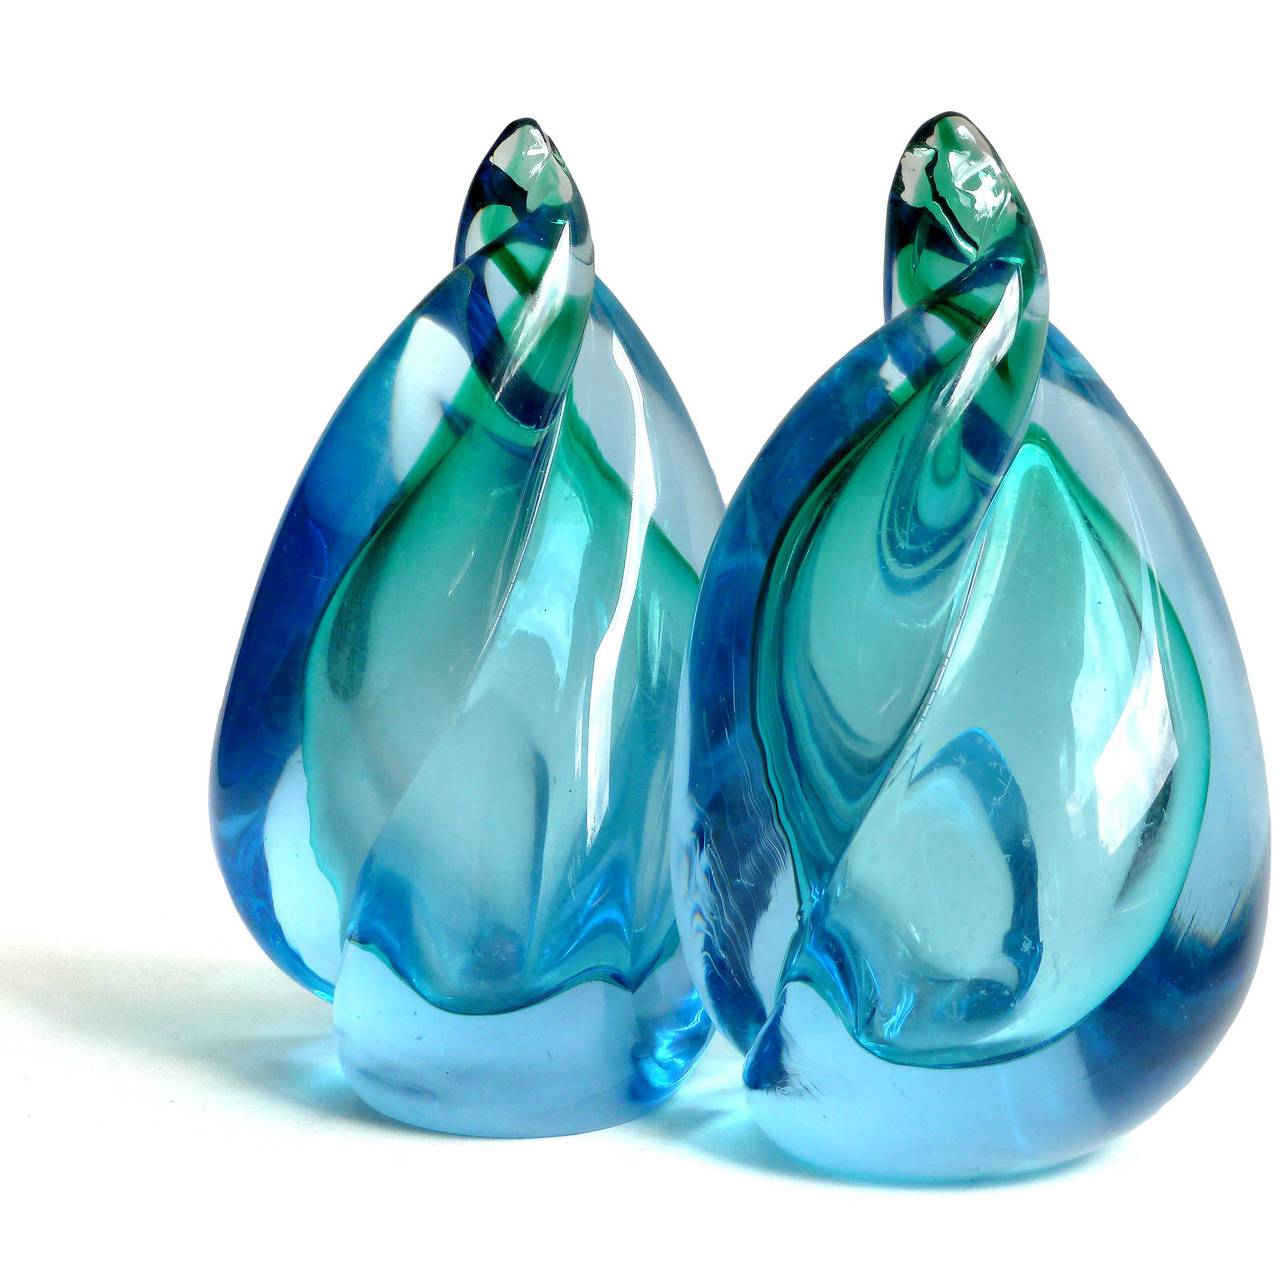 FREE Shipping Worldwide! See details below description.

Wonderful Murano Hand Blown Blue over Green Sommerso Art Glass Bookends in Twisting Flame Design. Documented to designer Alfredo Barbini, circa 1950-1960, and published in his catalog. Great